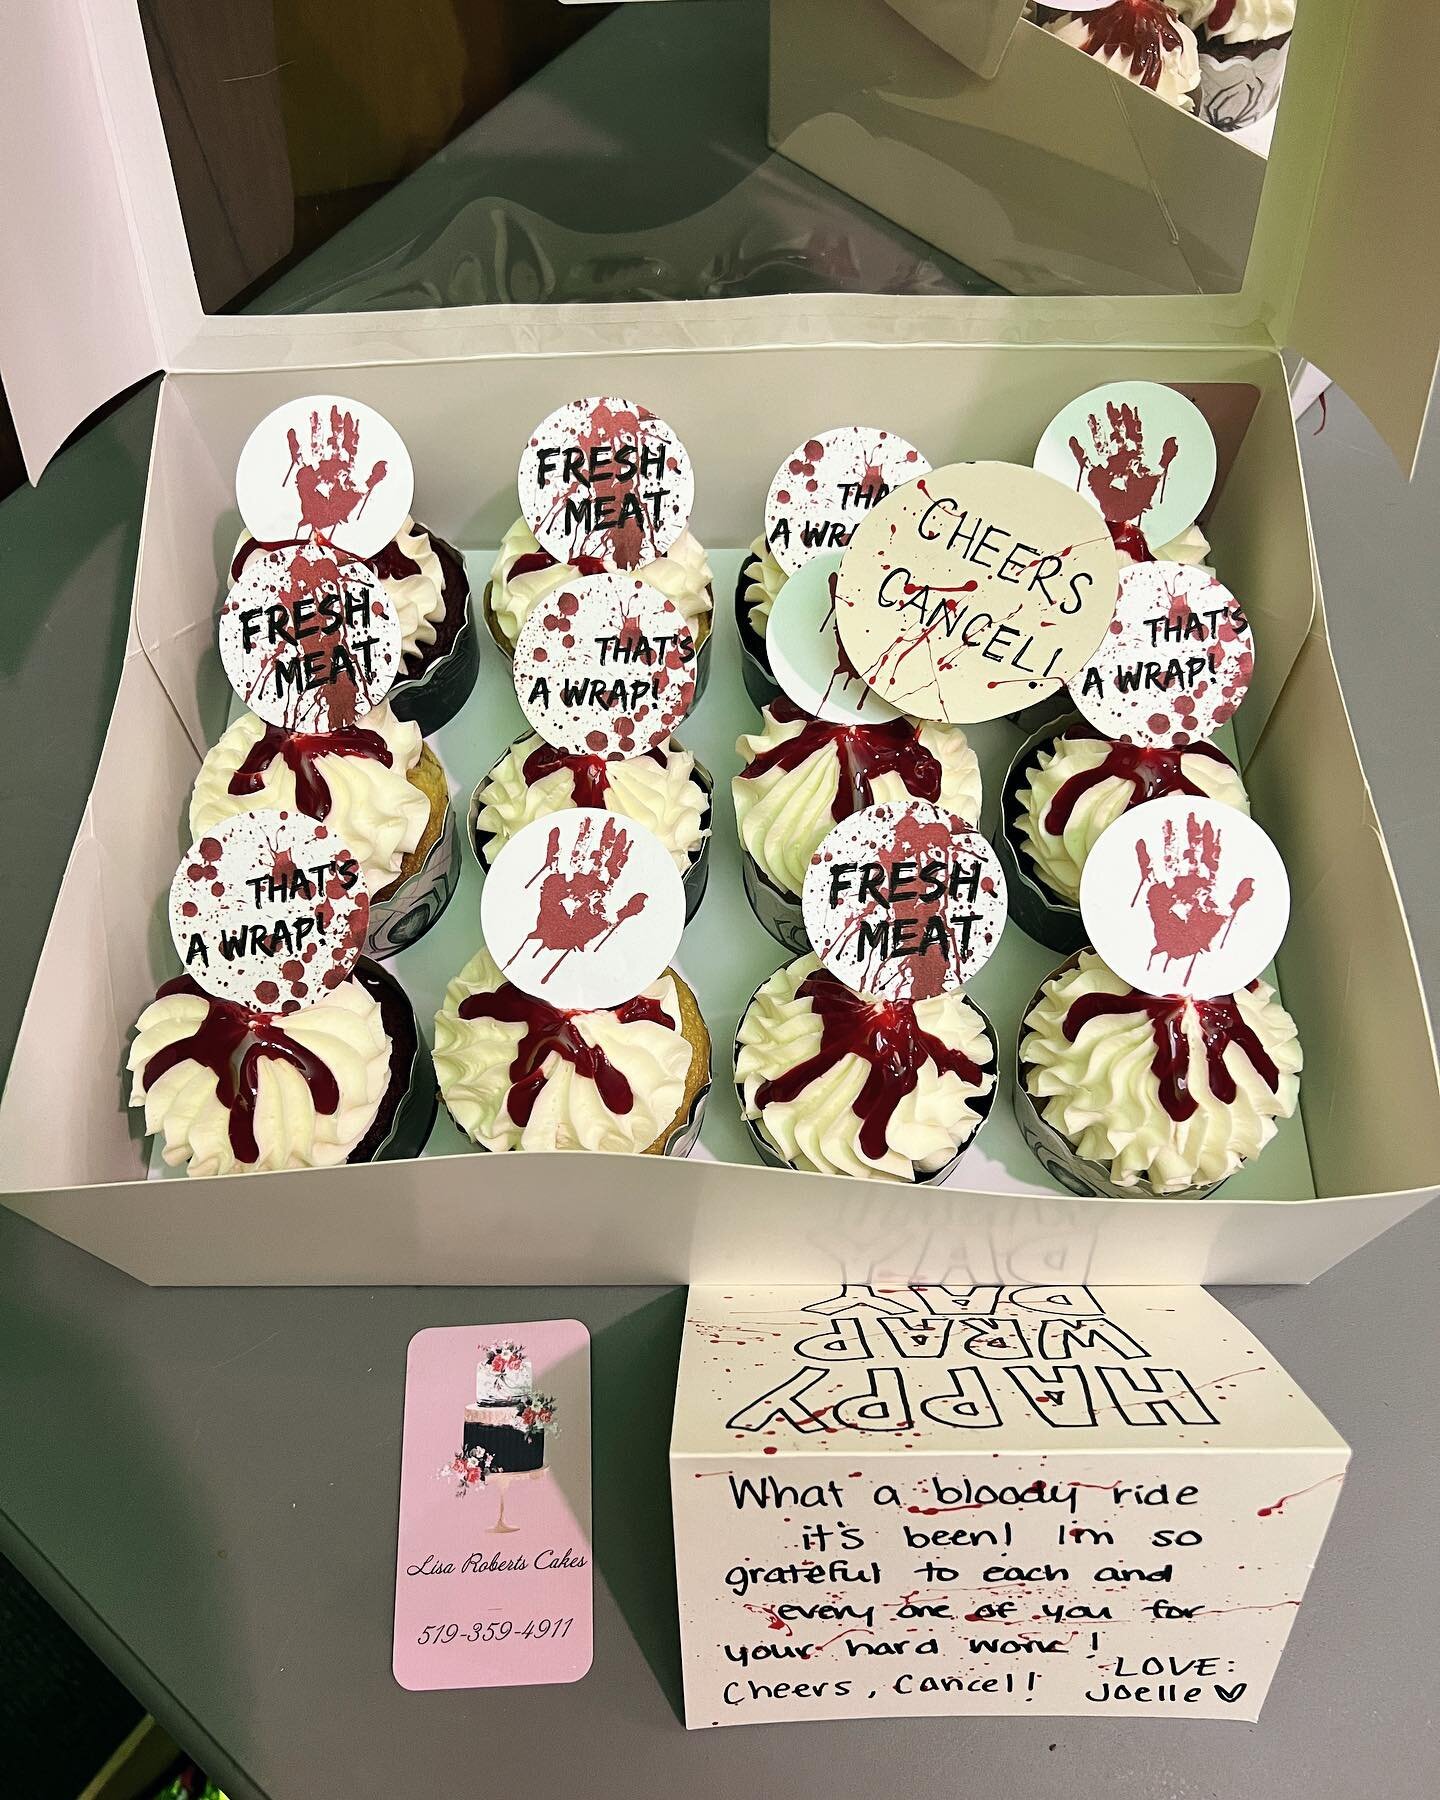 Amazing Horror themed Cupcakes from Lisa Roberts!!
Thanks Joelle!!!